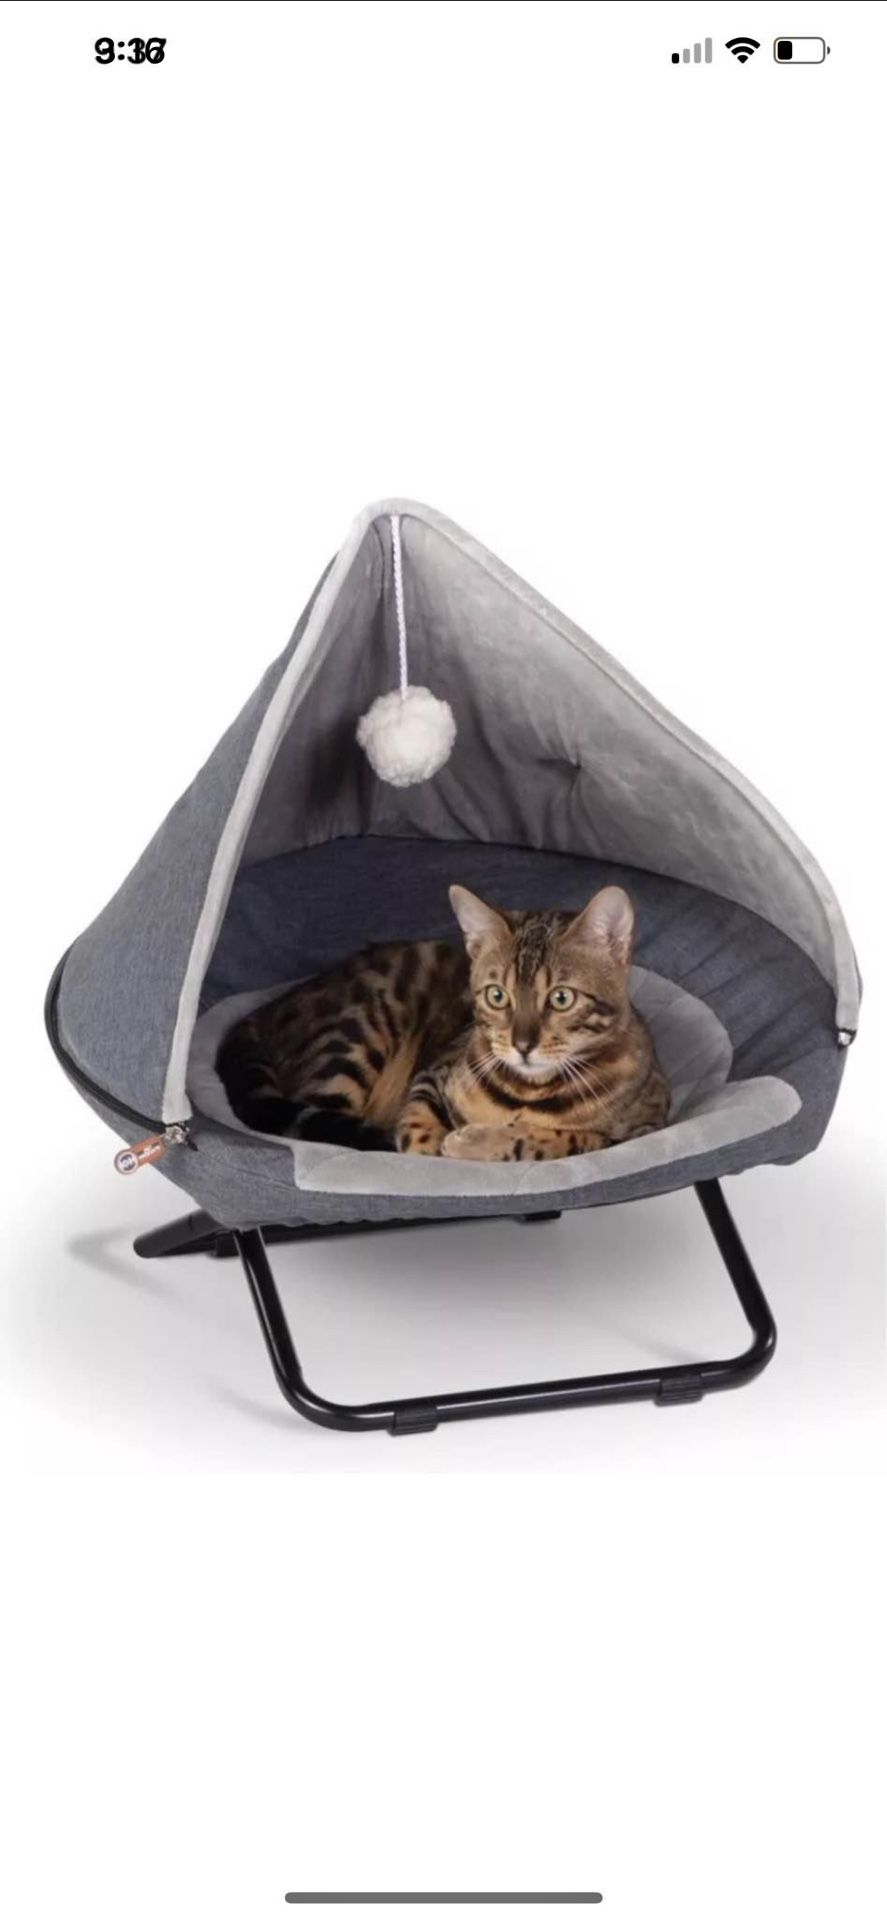 K&H Cozy Cot For Small Pets